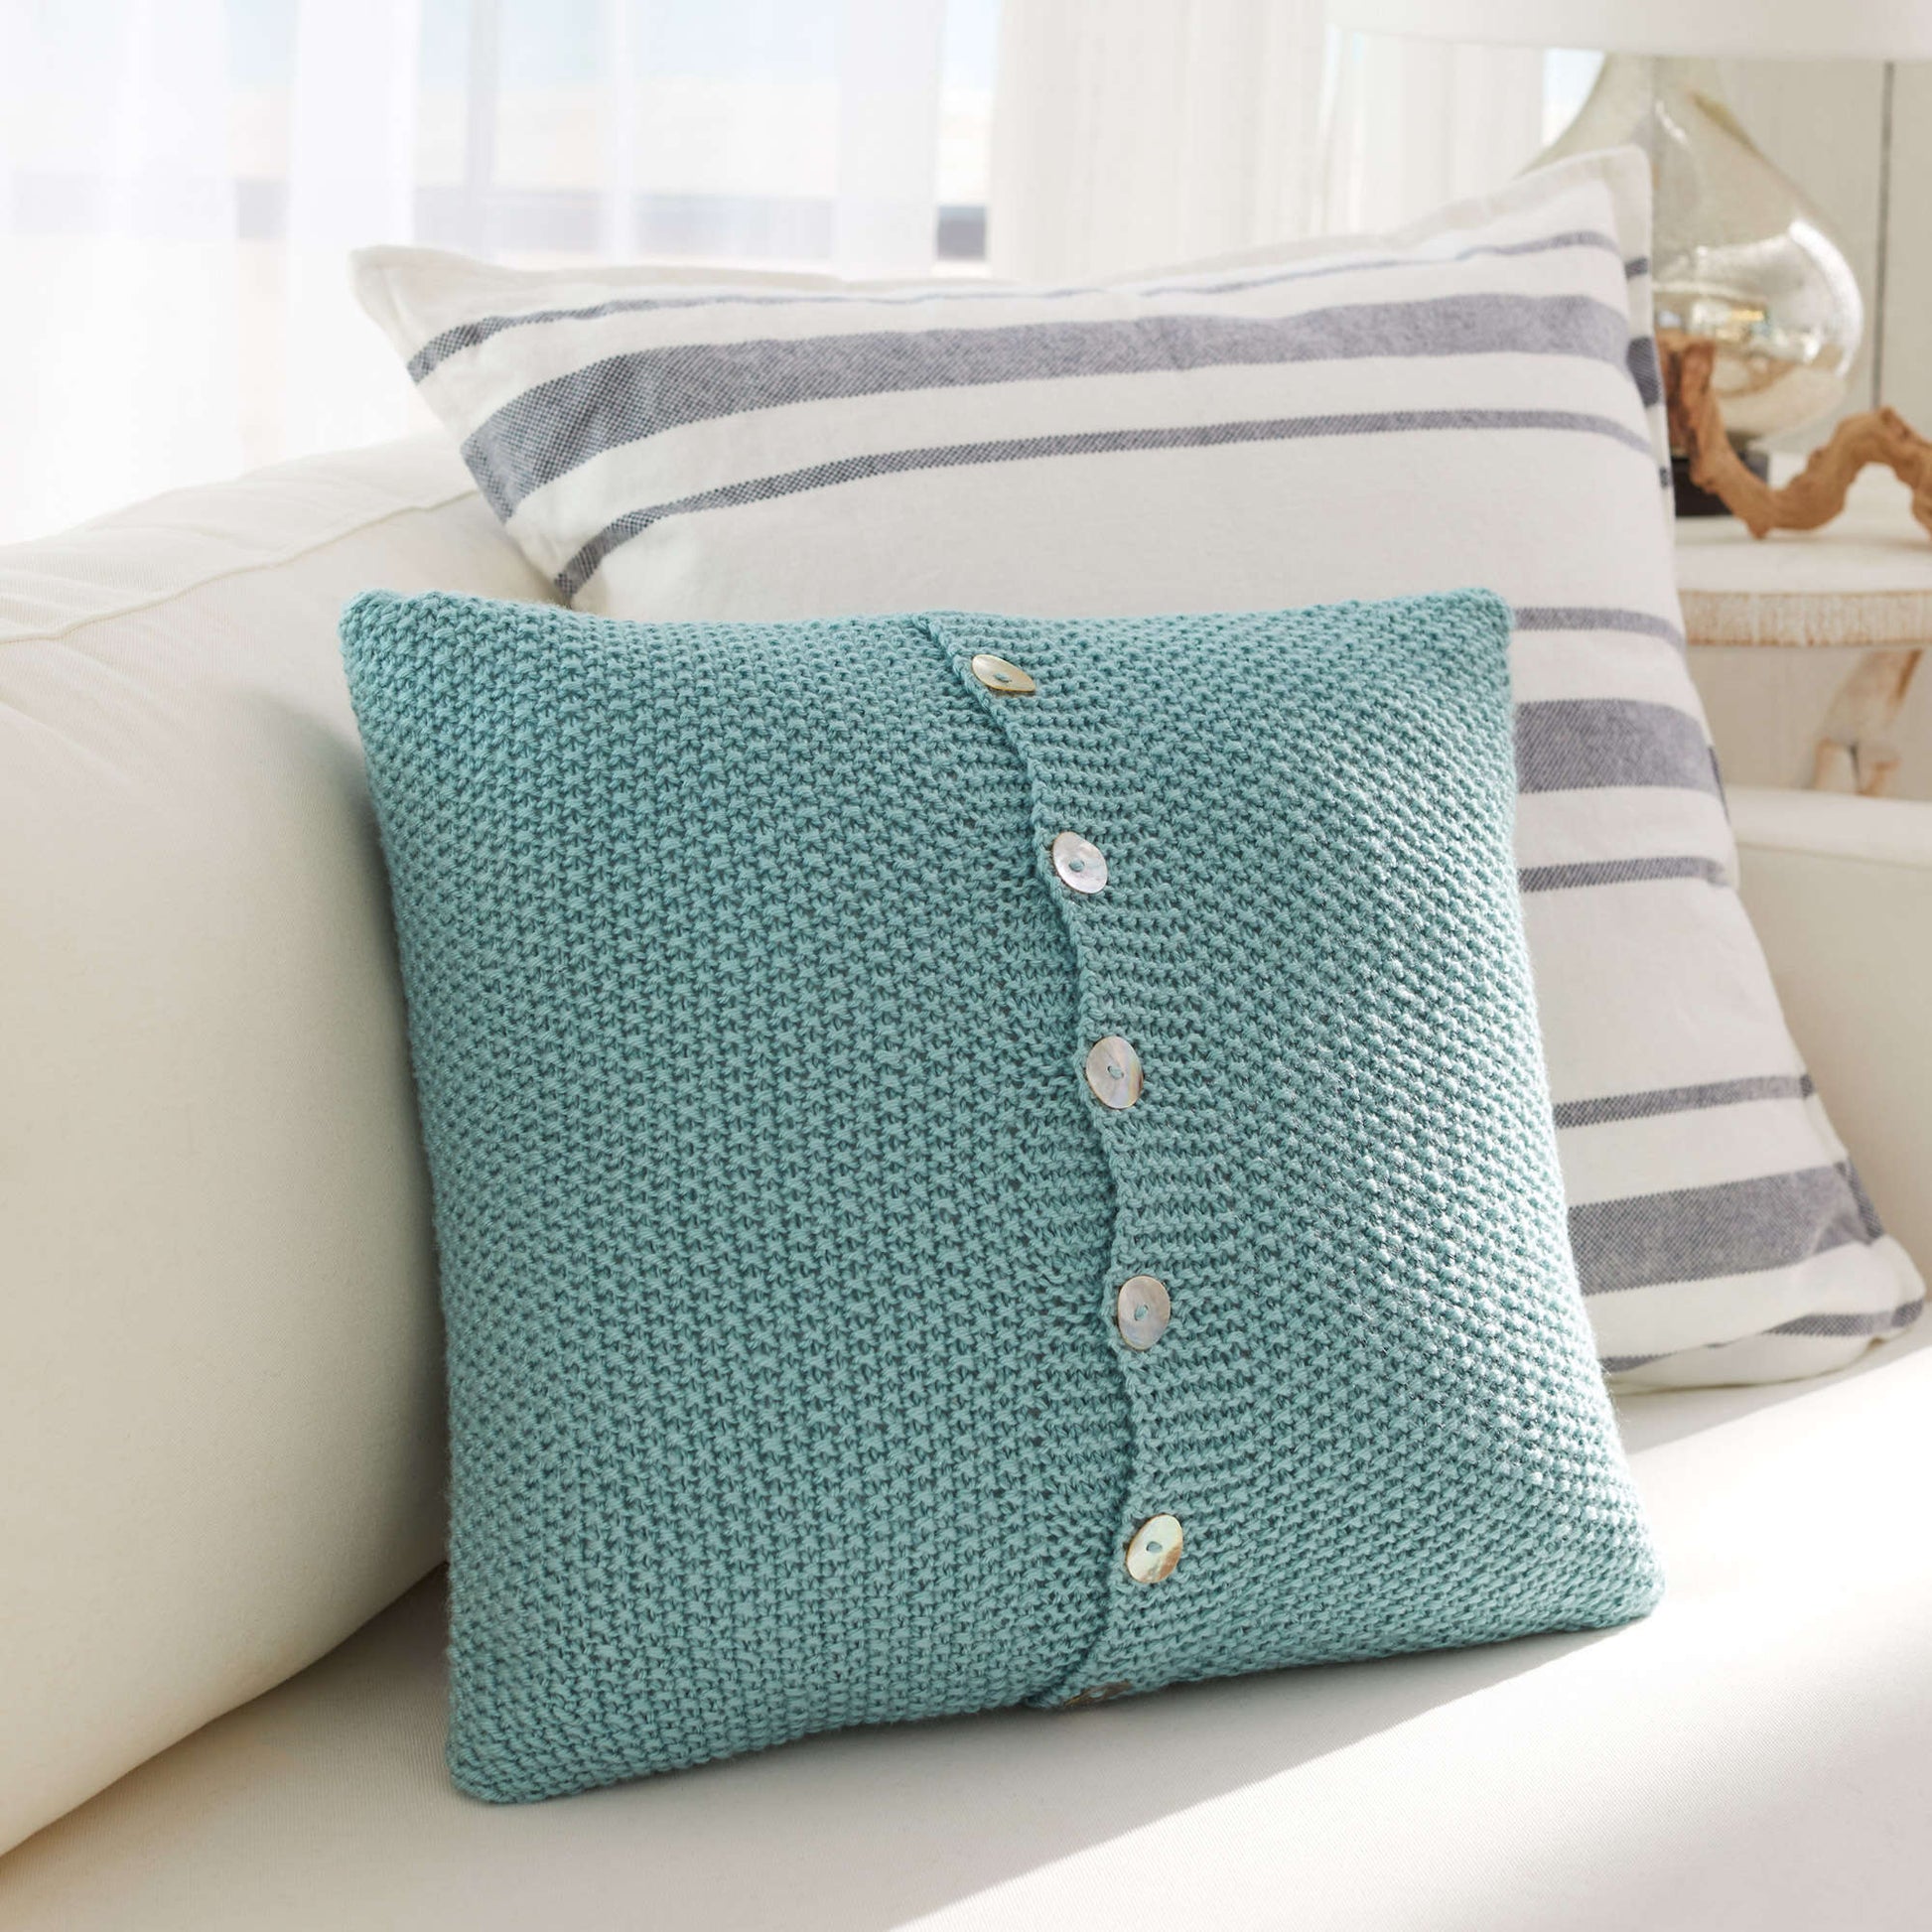 Free Red Heart Beach House Knit Pillows Pattern